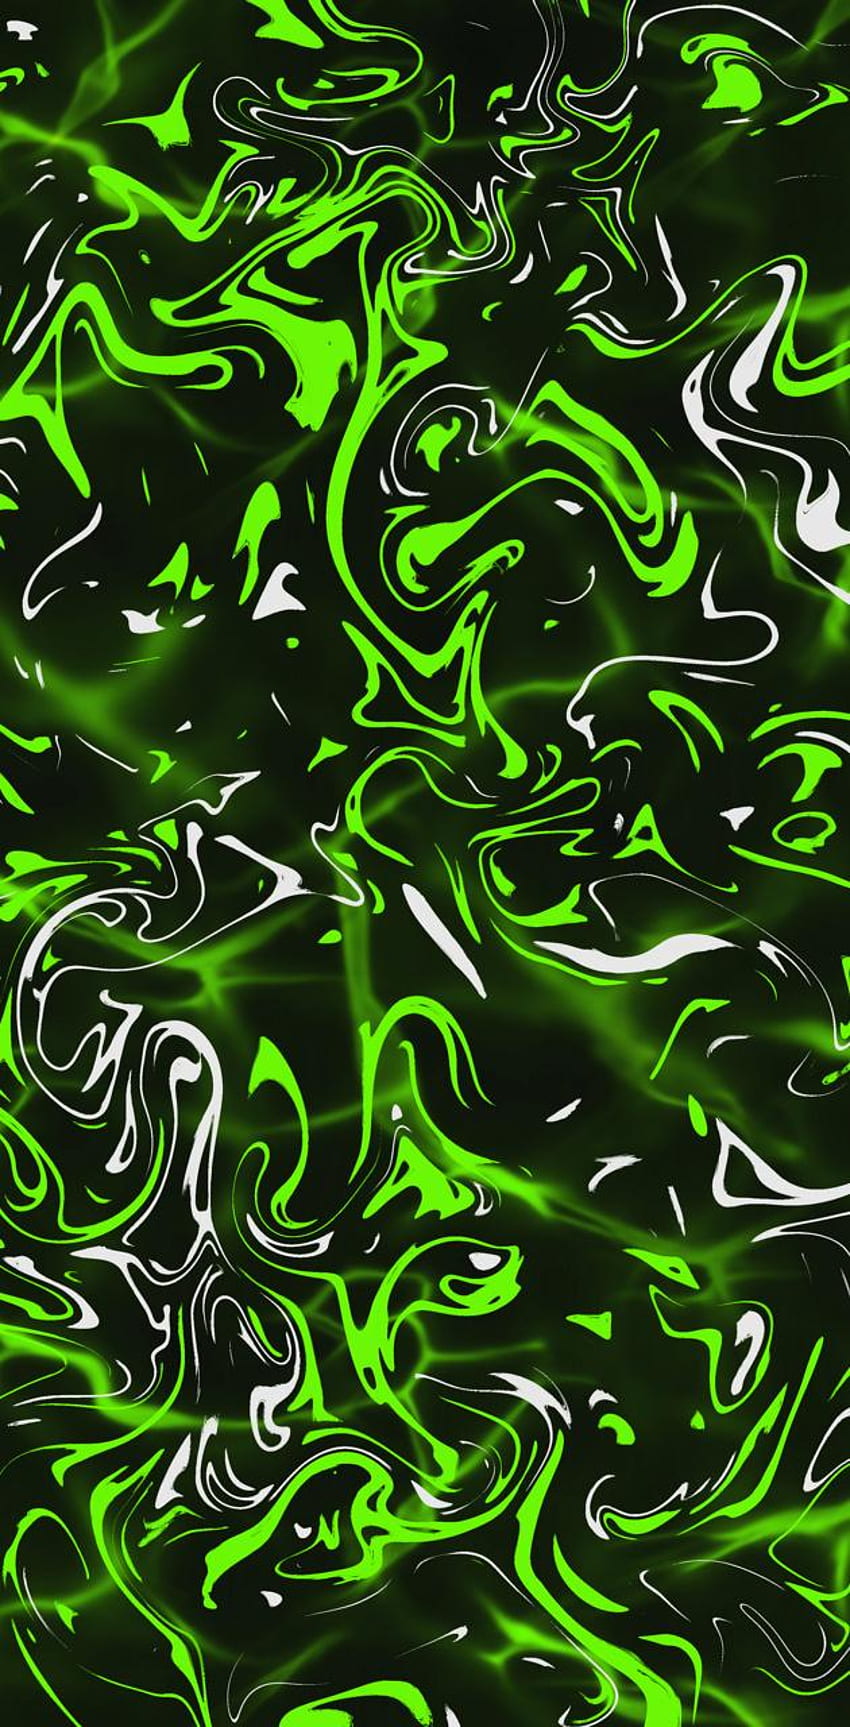 Green And Black Square 4K HD Abstract Wallpapers  HD Wallpapers  ID 40500